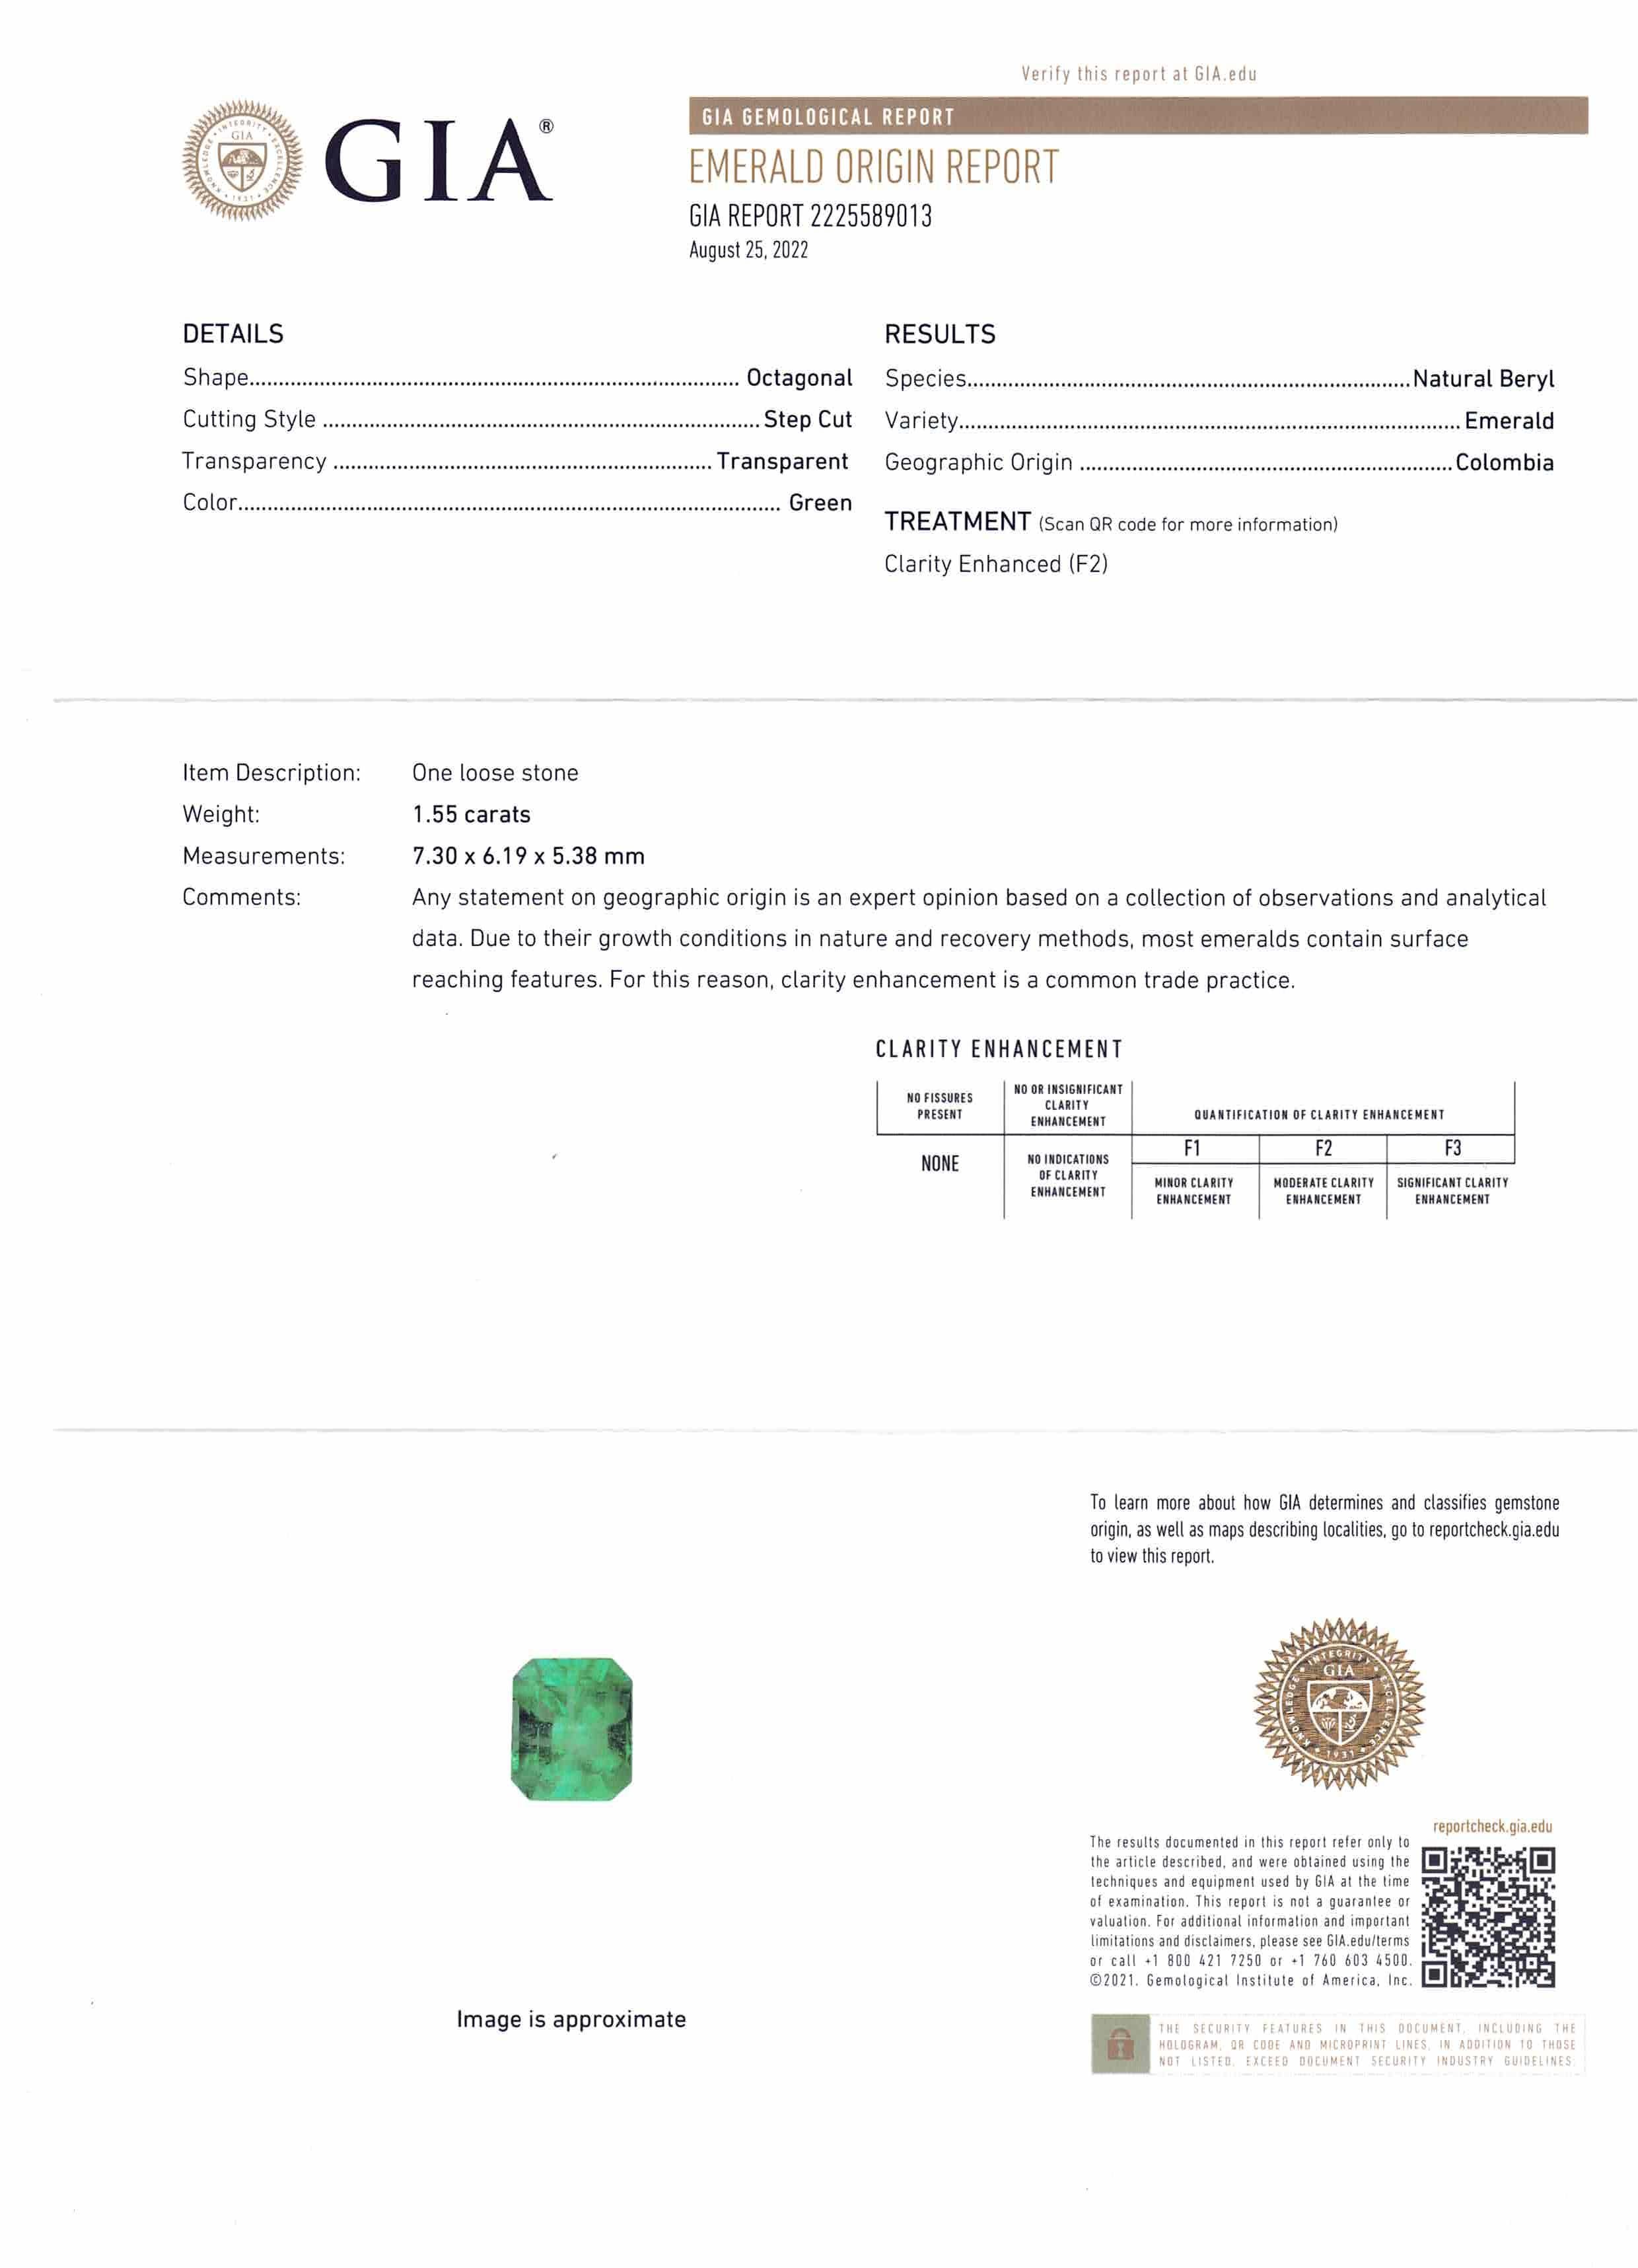 This is a stunning GIA Certified Emerald

 

The GIA report reads as follows:

GIA Report Number: 2225589013
Shape: Octagonal
Cutting Style:
Cutting Style: Crown: Step Cut
Cutting Style: Pavilion:
Transparency: Transparent
Color: Green

